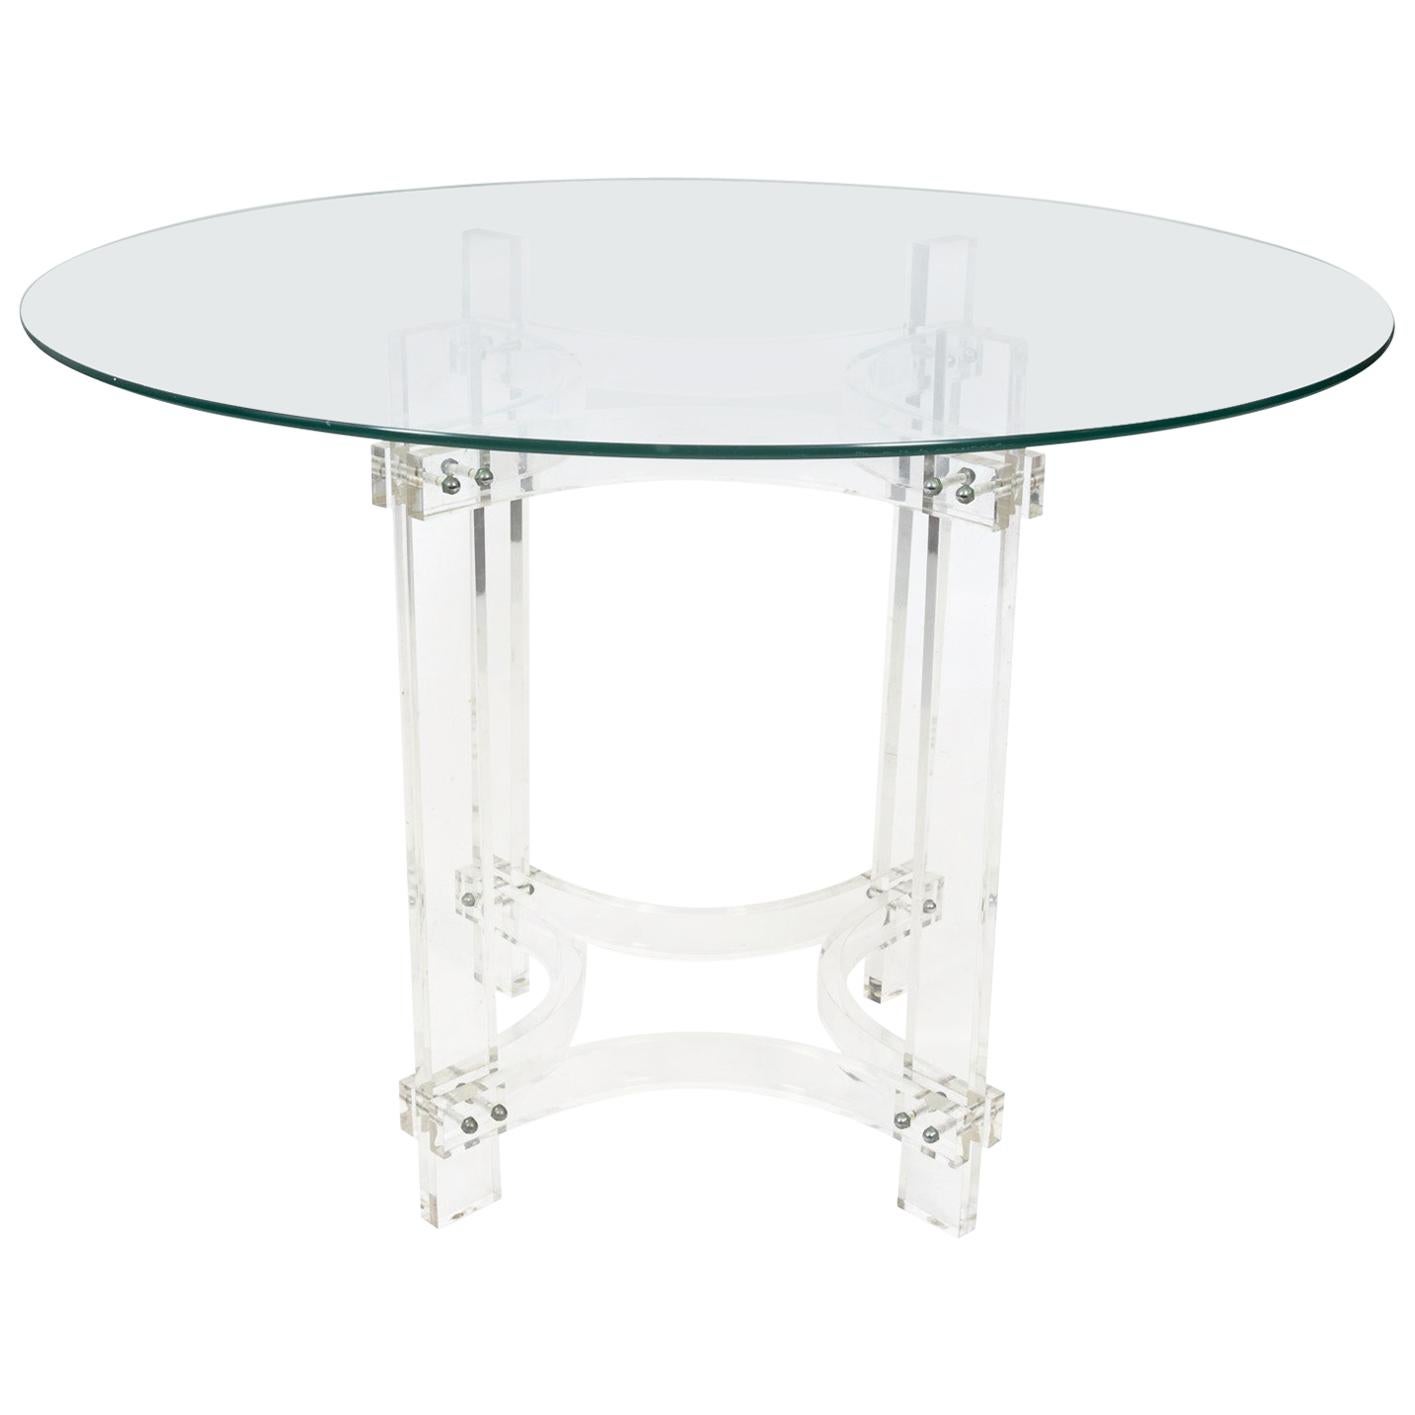 Lucite Center Table with Glass Top